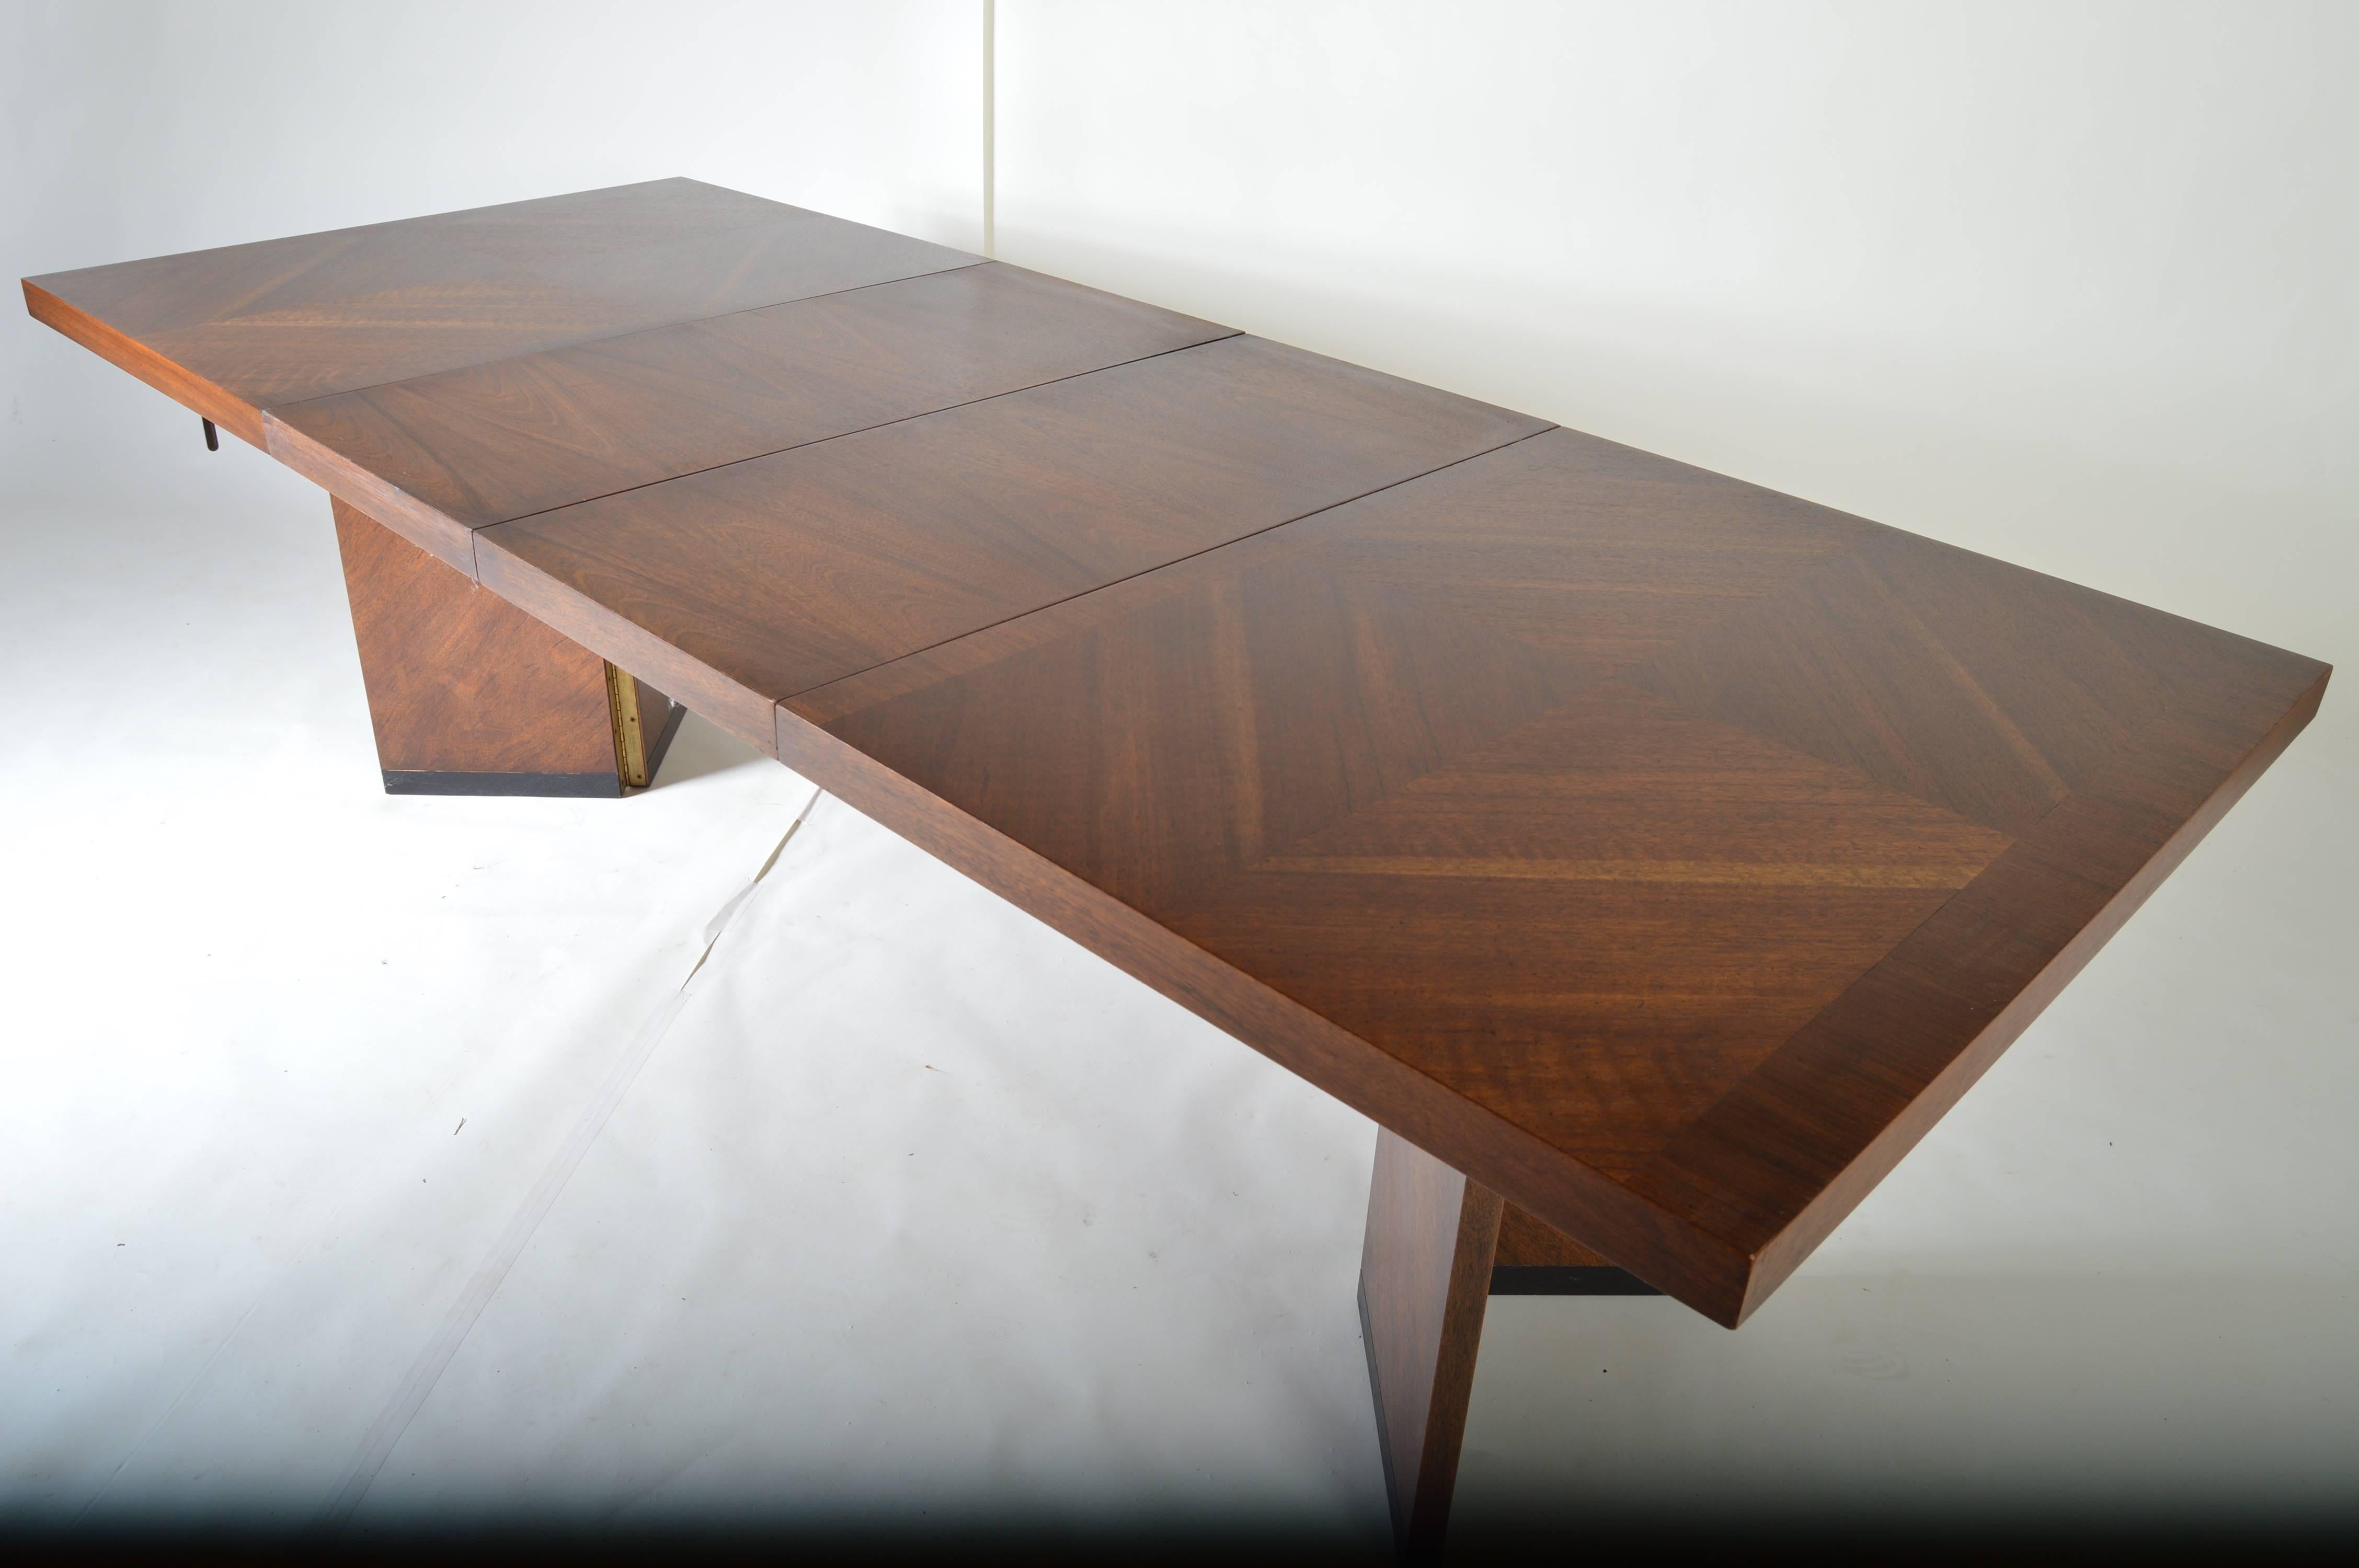 A vintage Lane dining table having crotch grain walnut veneers. Fully extendable and adjustable. 
Measurements while compact: H29